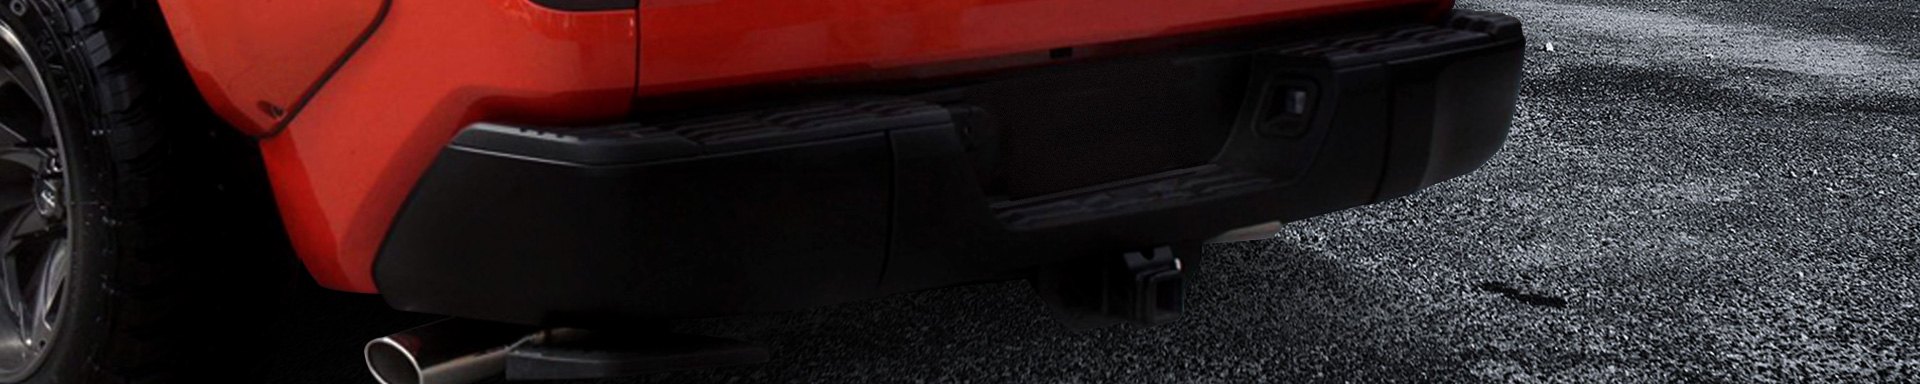 Reinforce the Rear of Your Tundra with new Sped-D HD Bumper